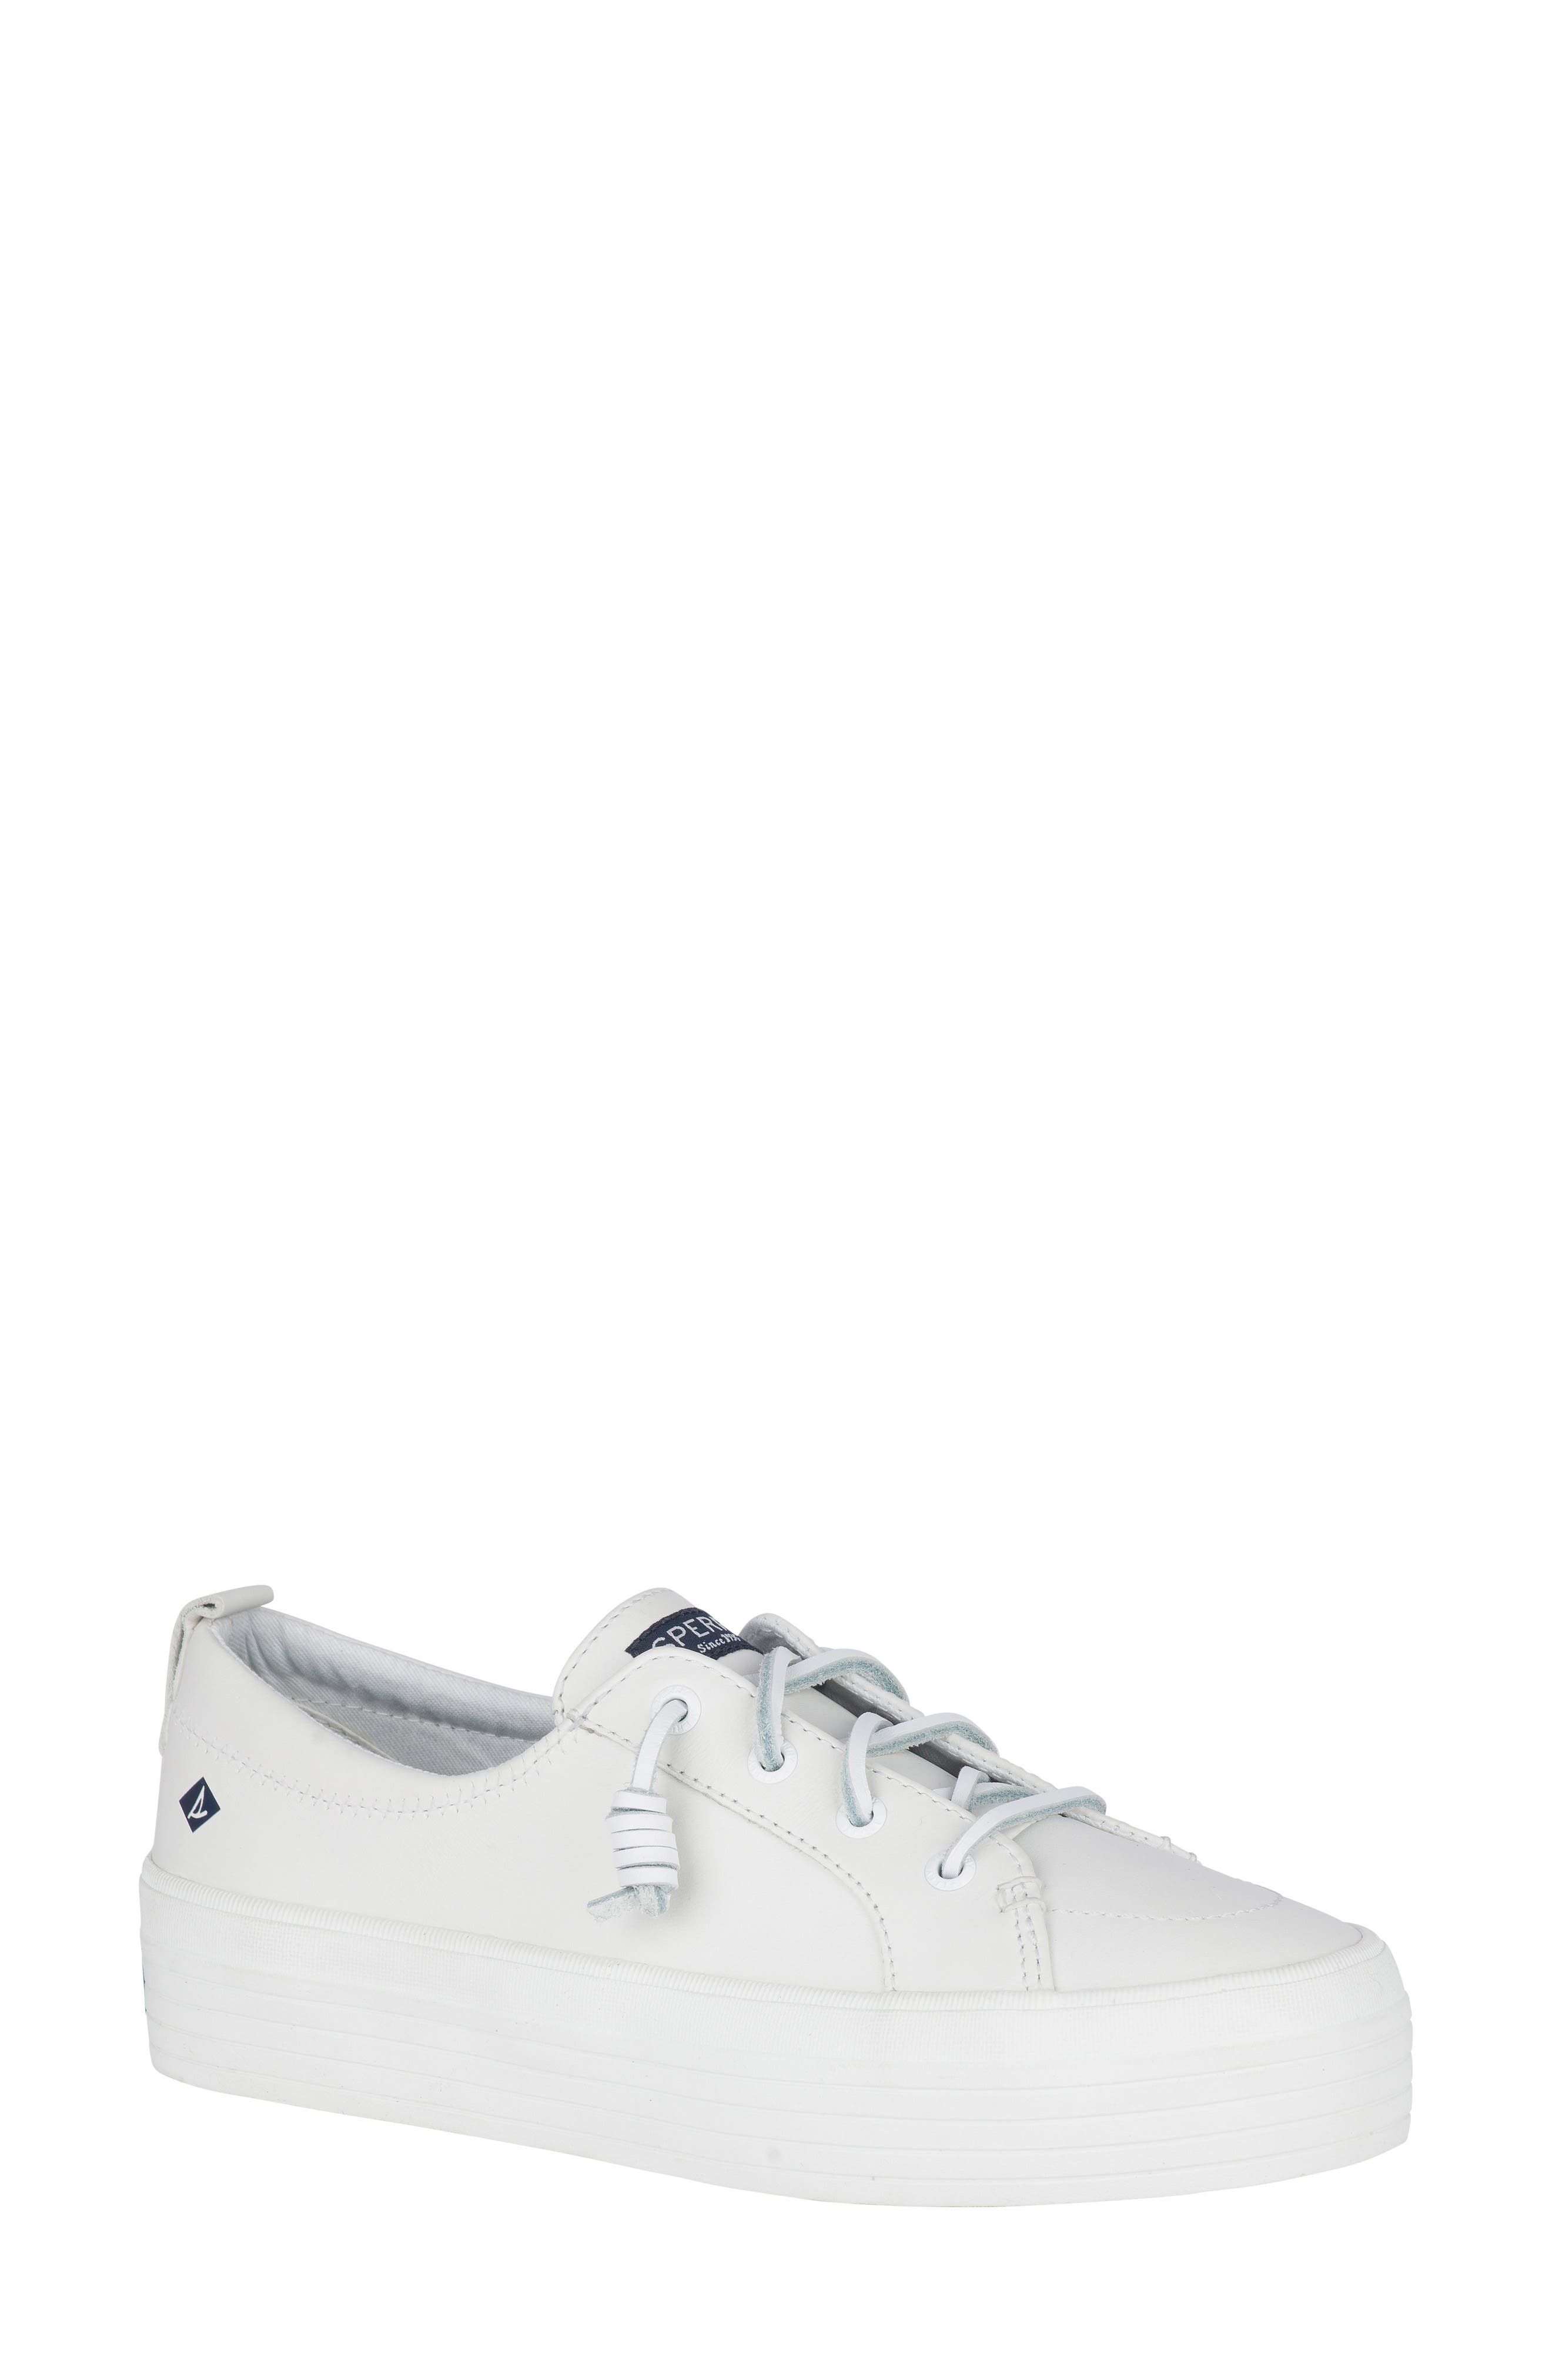 sperry white shoes women